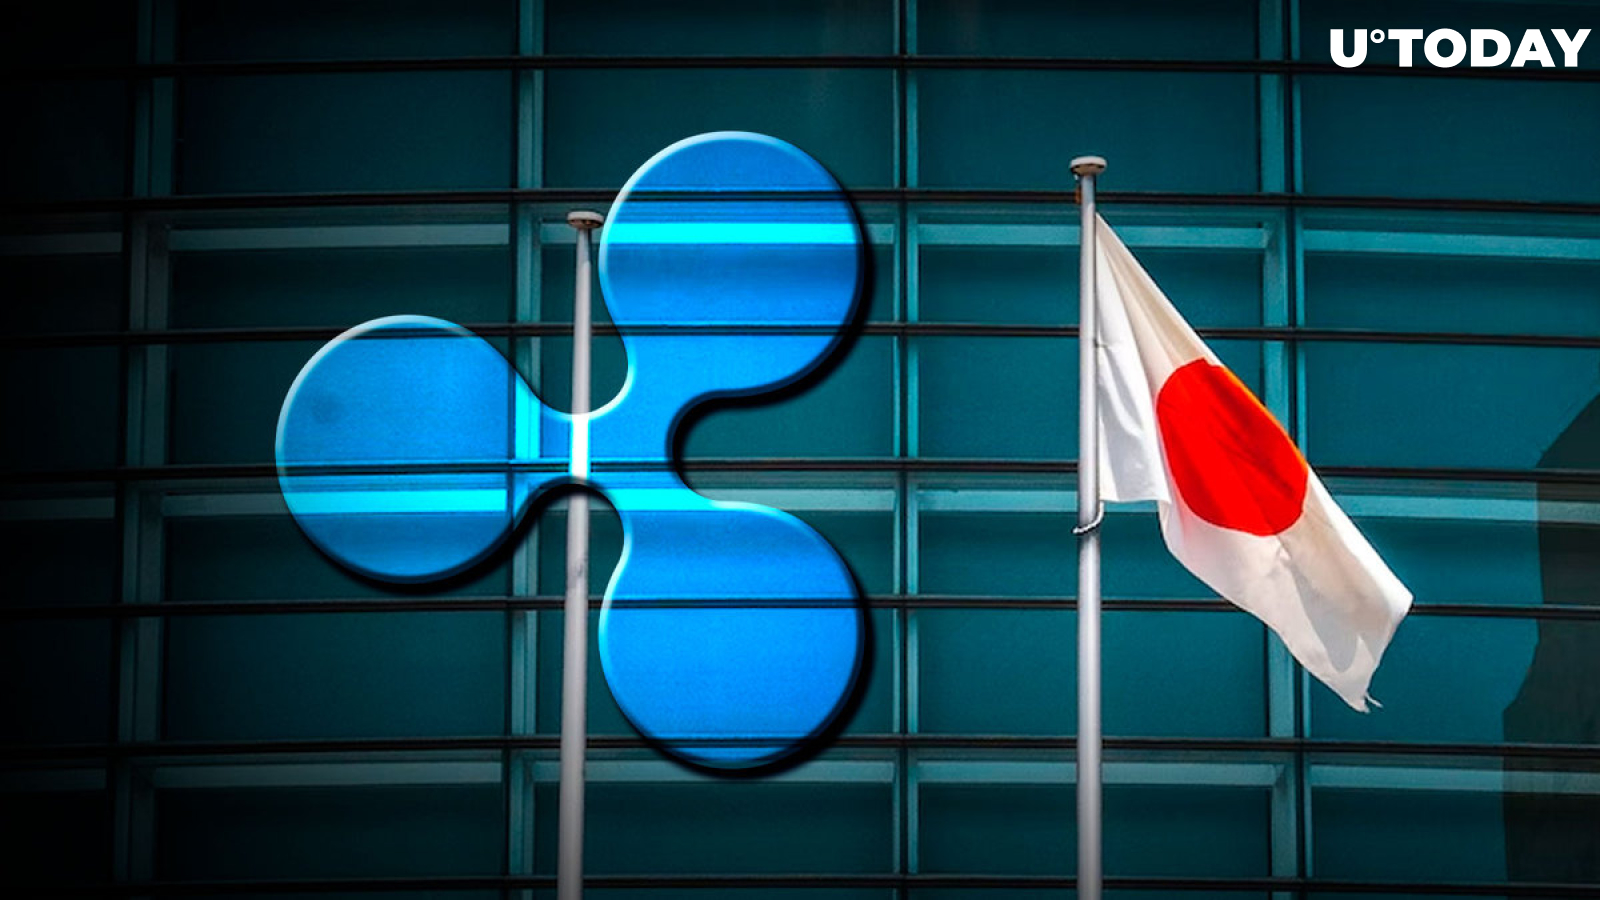 Ripple Expands Its Presence in Japan with Latest Partnership